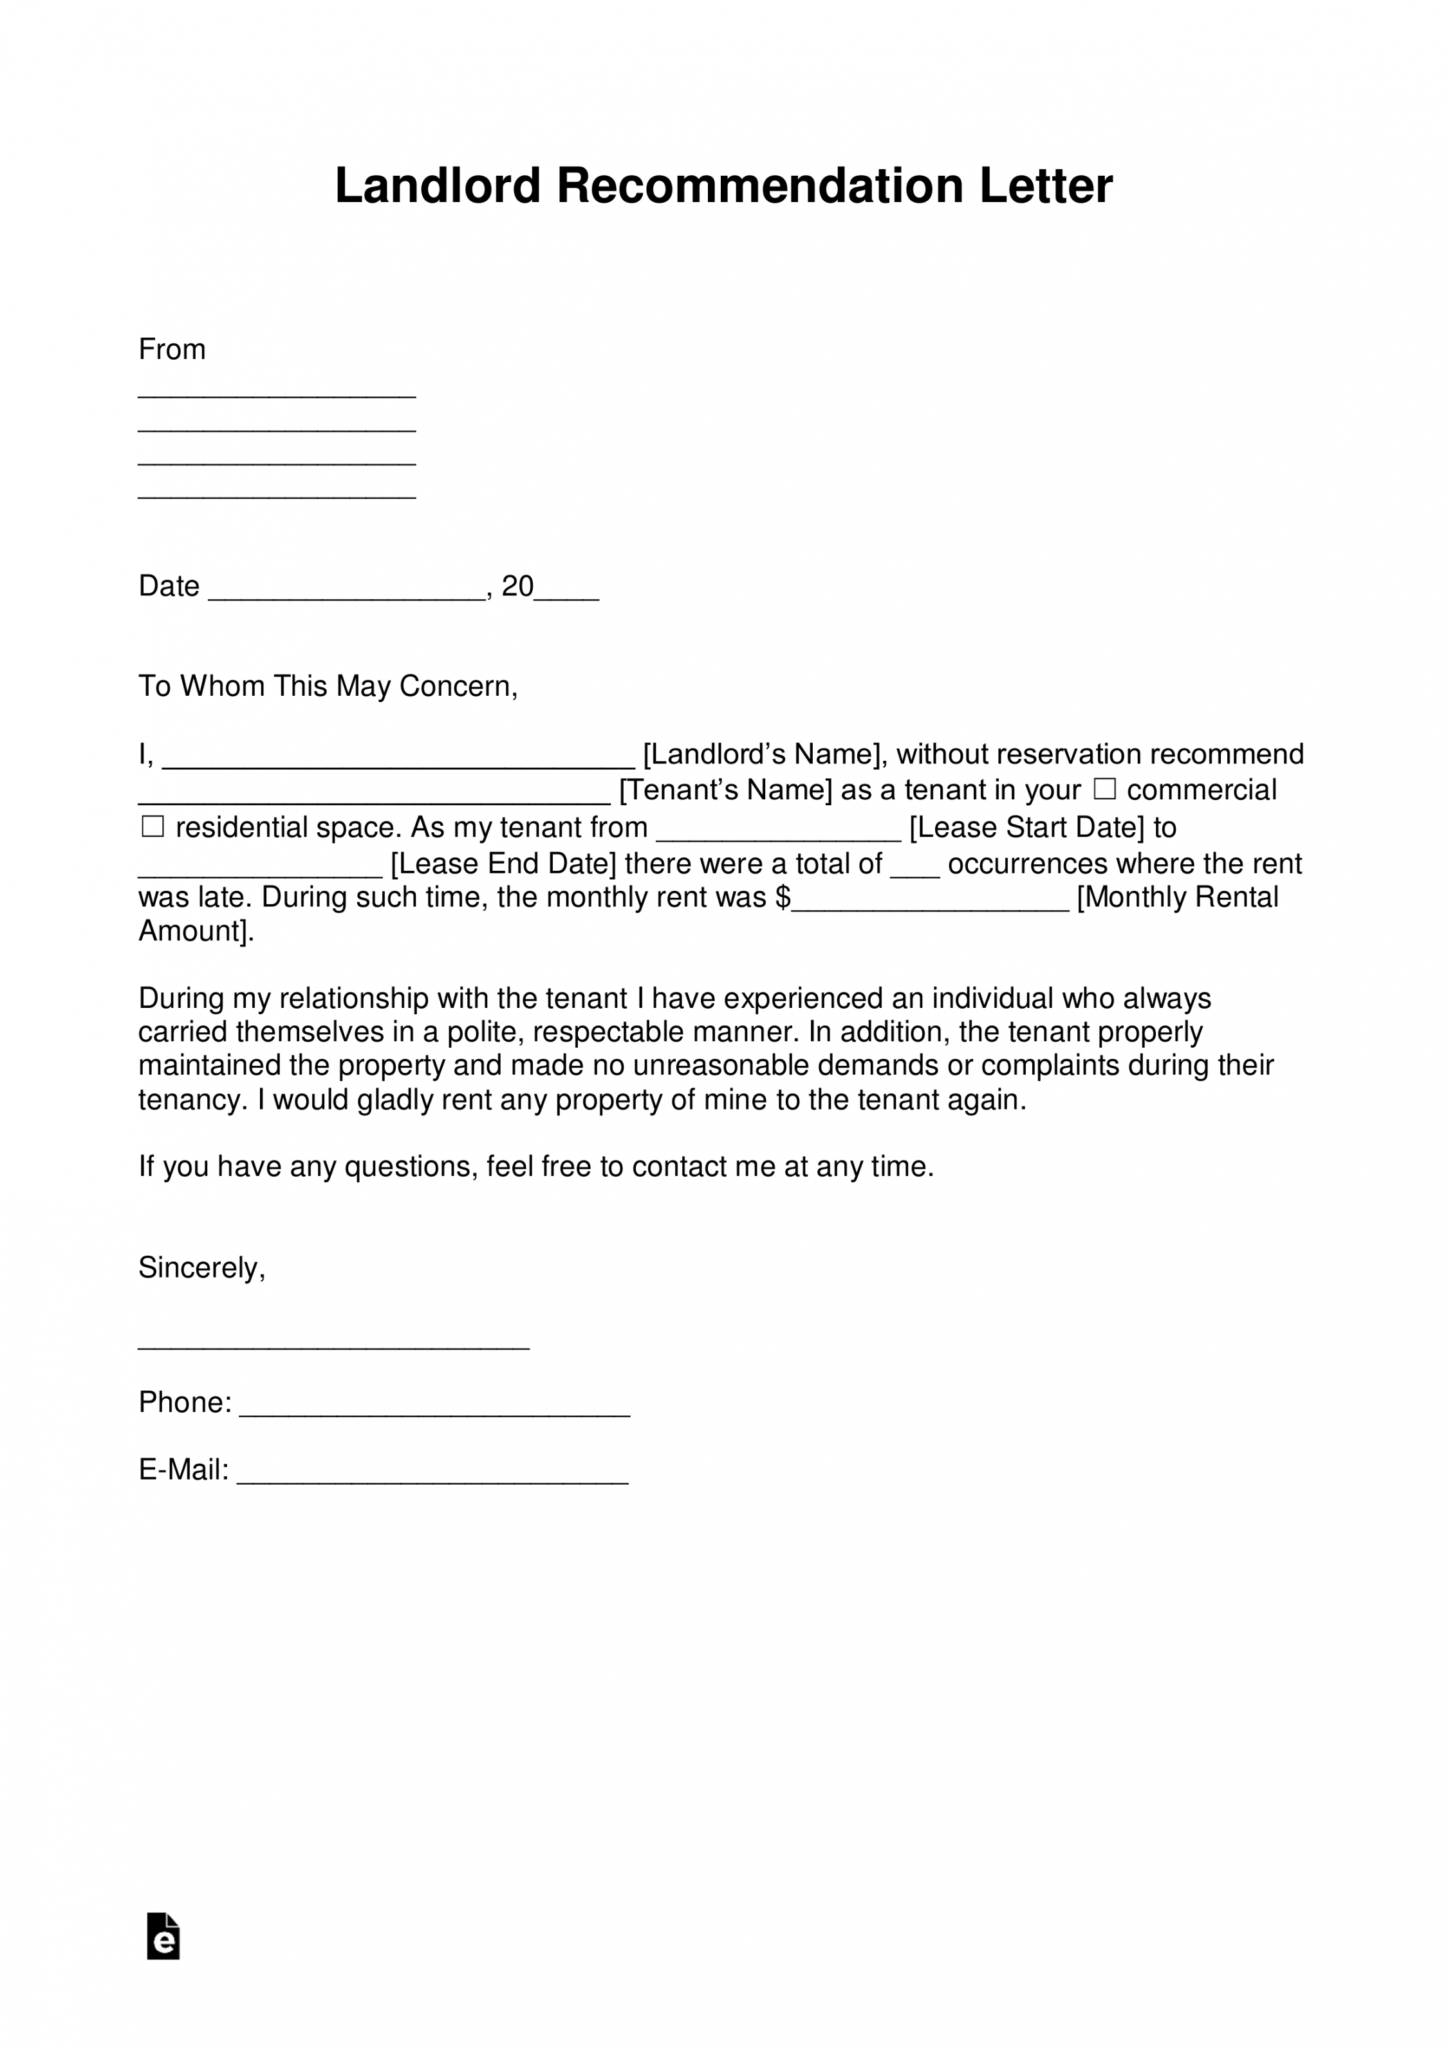 printable-free-landlord-recommendation-letter-for-a-tenant-with-rental